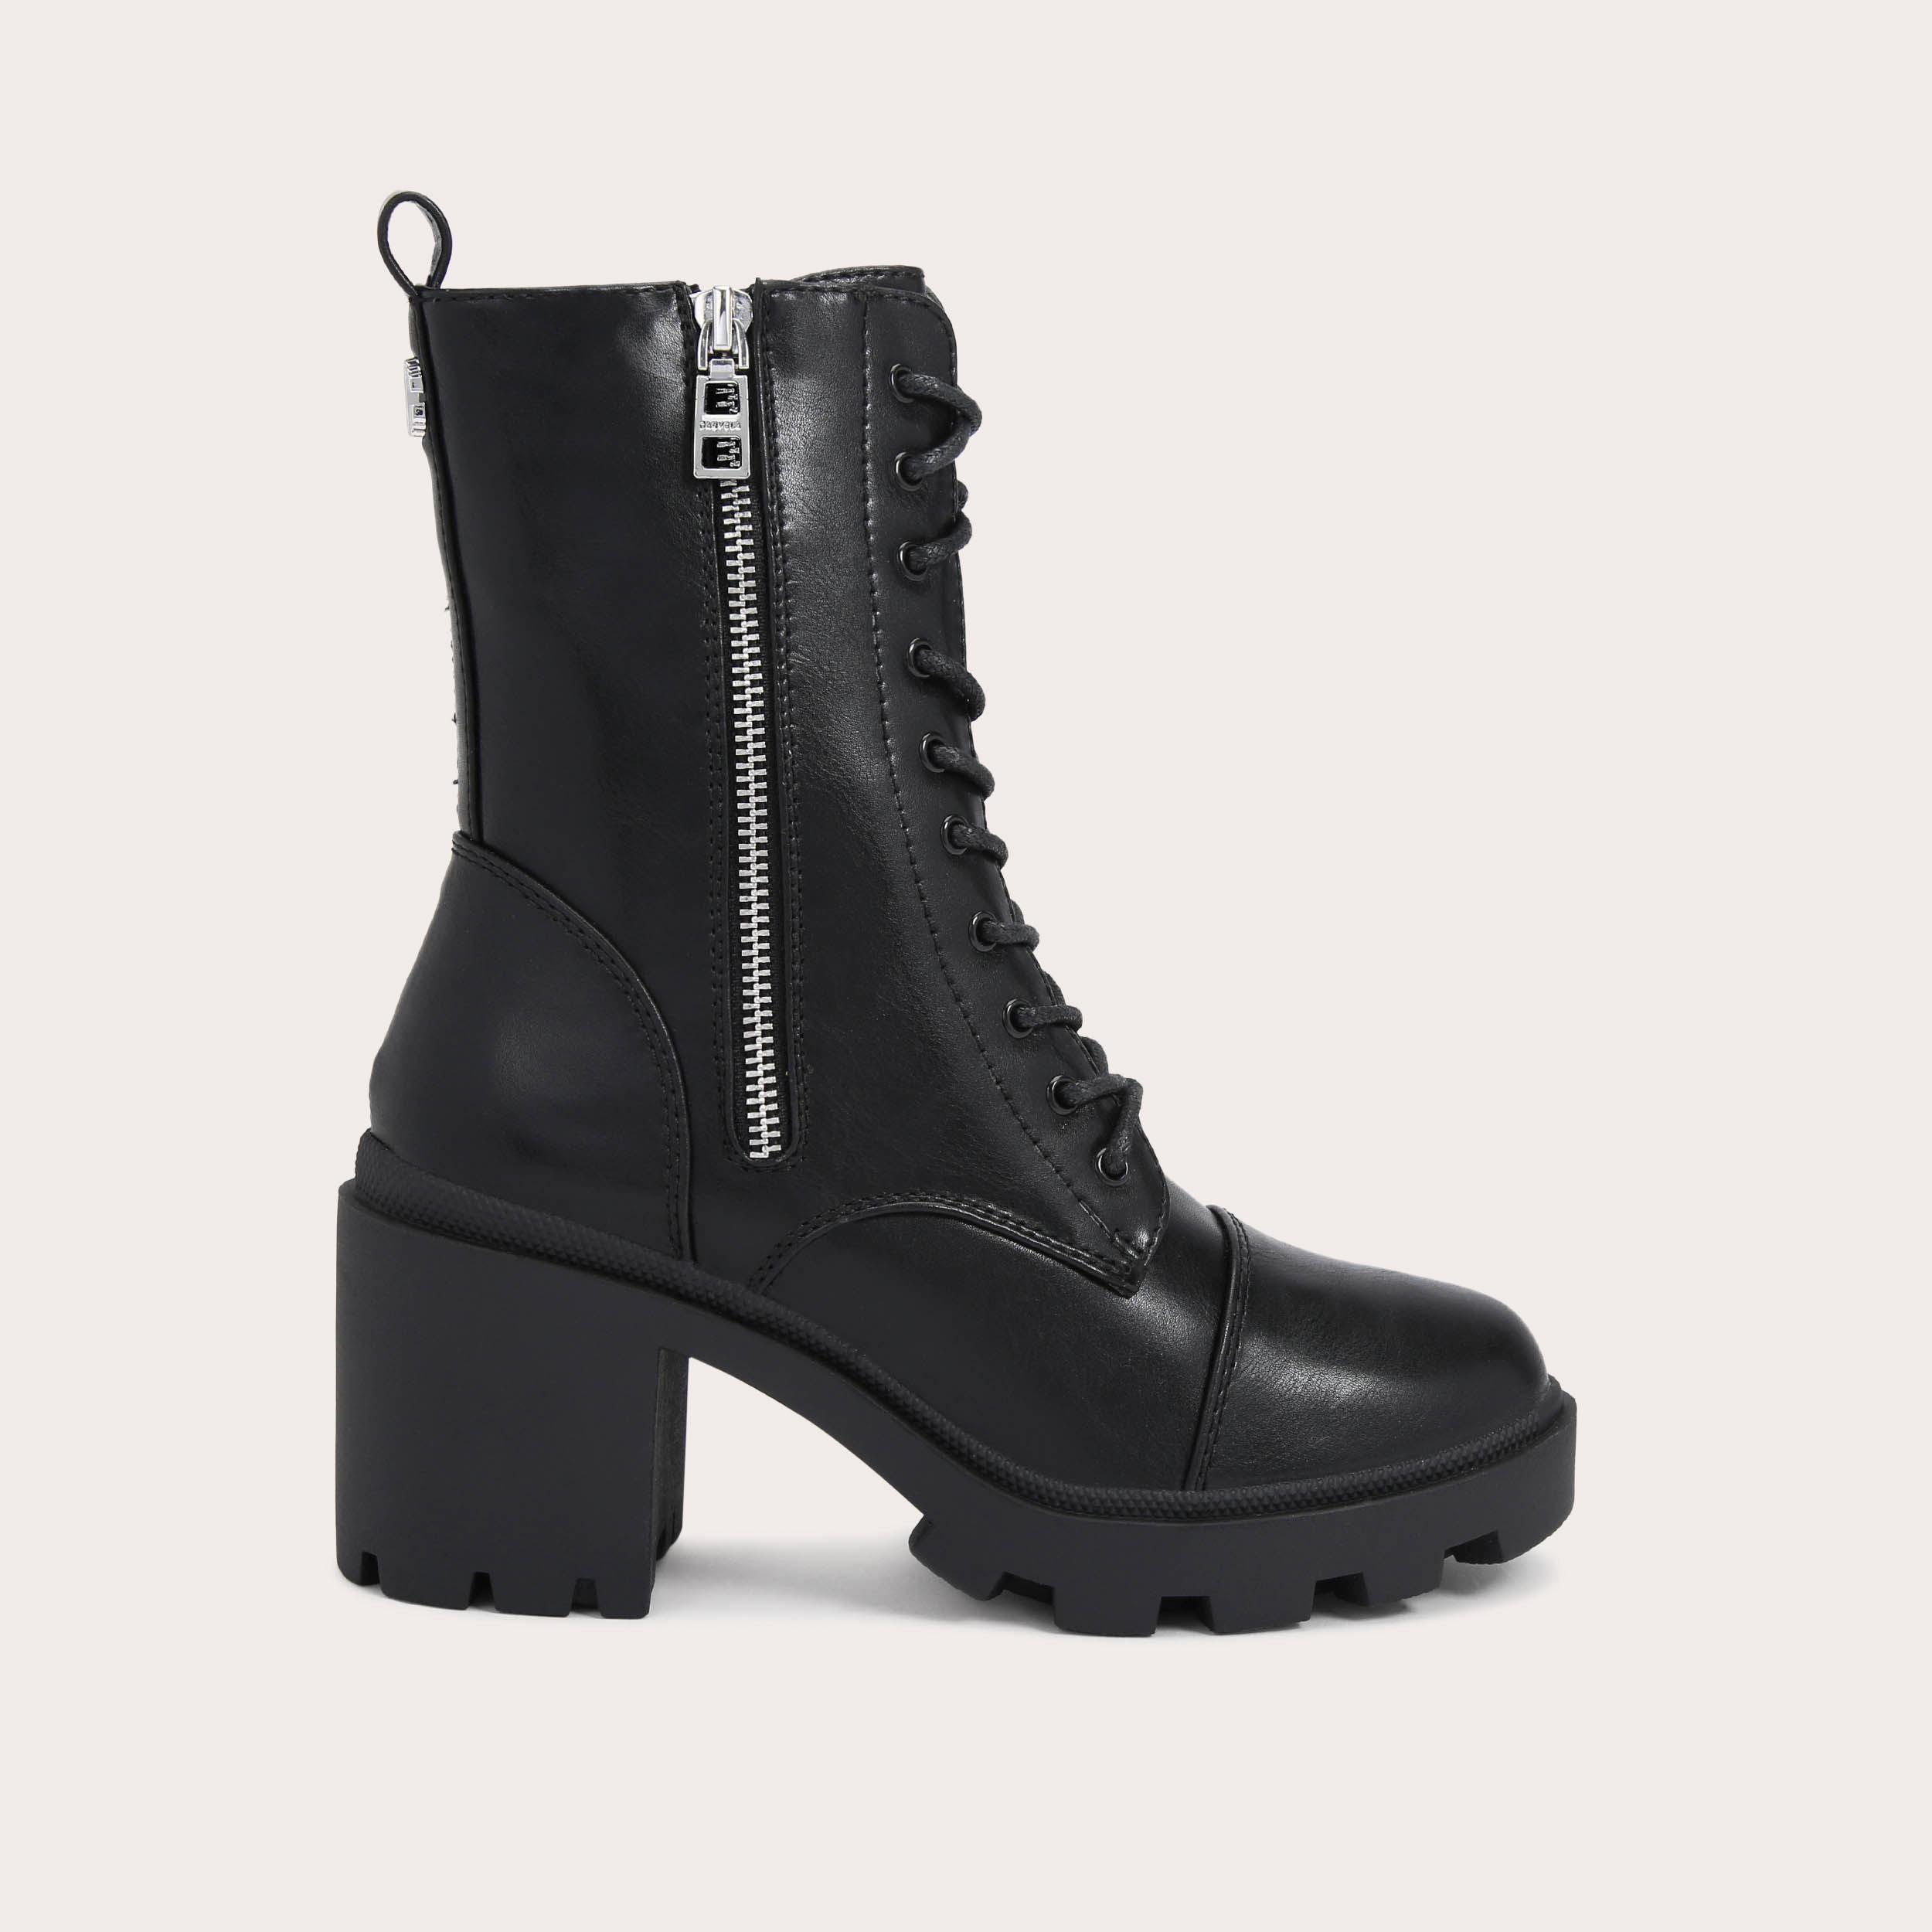 SIREN Black Lace Up Heel Ankle Boot by CARVELA